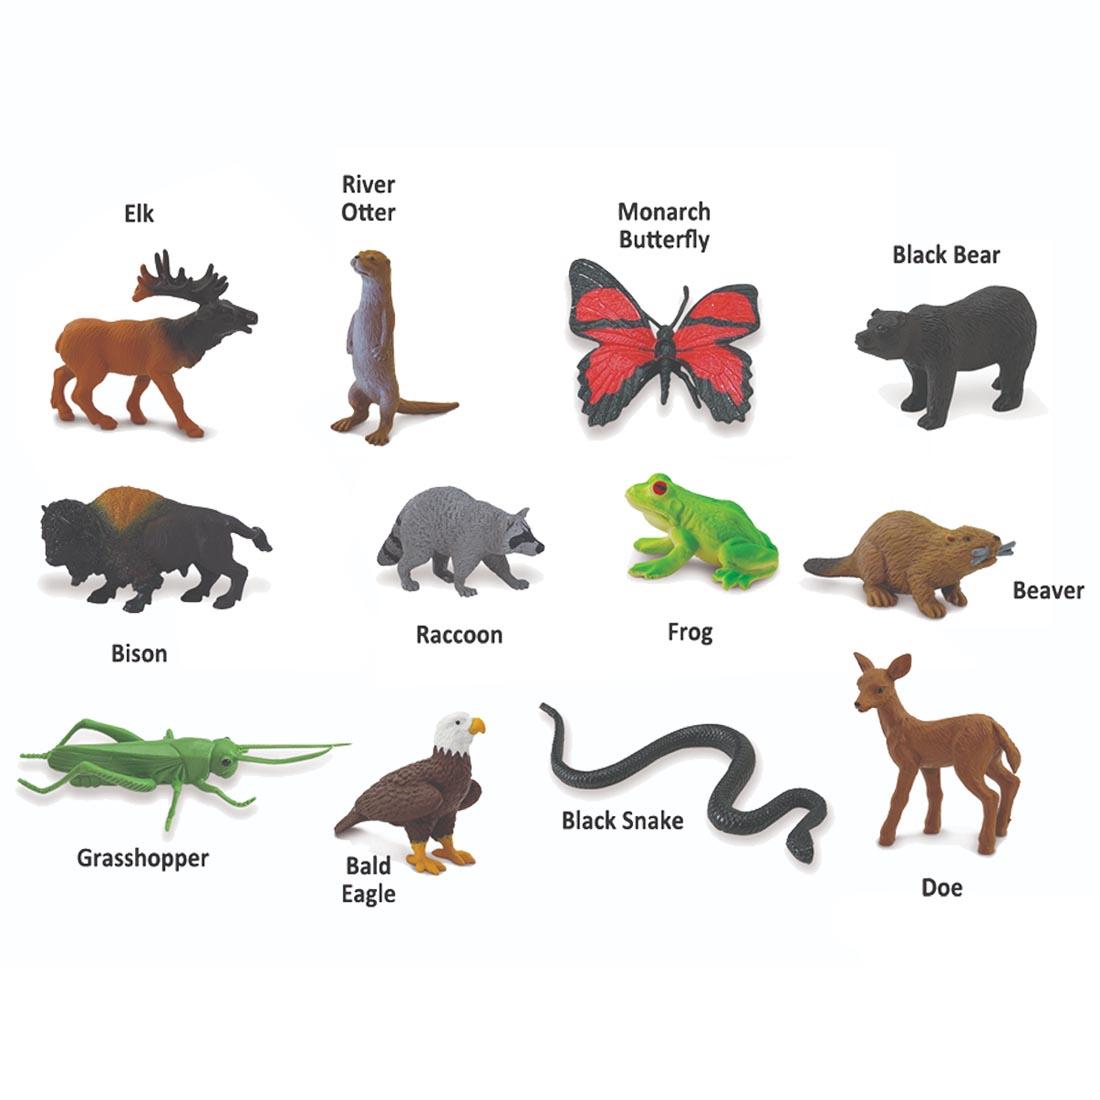 12 creatures from the In the Woods Figurine Set labeled with their names: elk, river otter, monarch butterfly, black bear, bison, raccoon, frog, beaver, grasshopper, bald eagle, black snake, doe